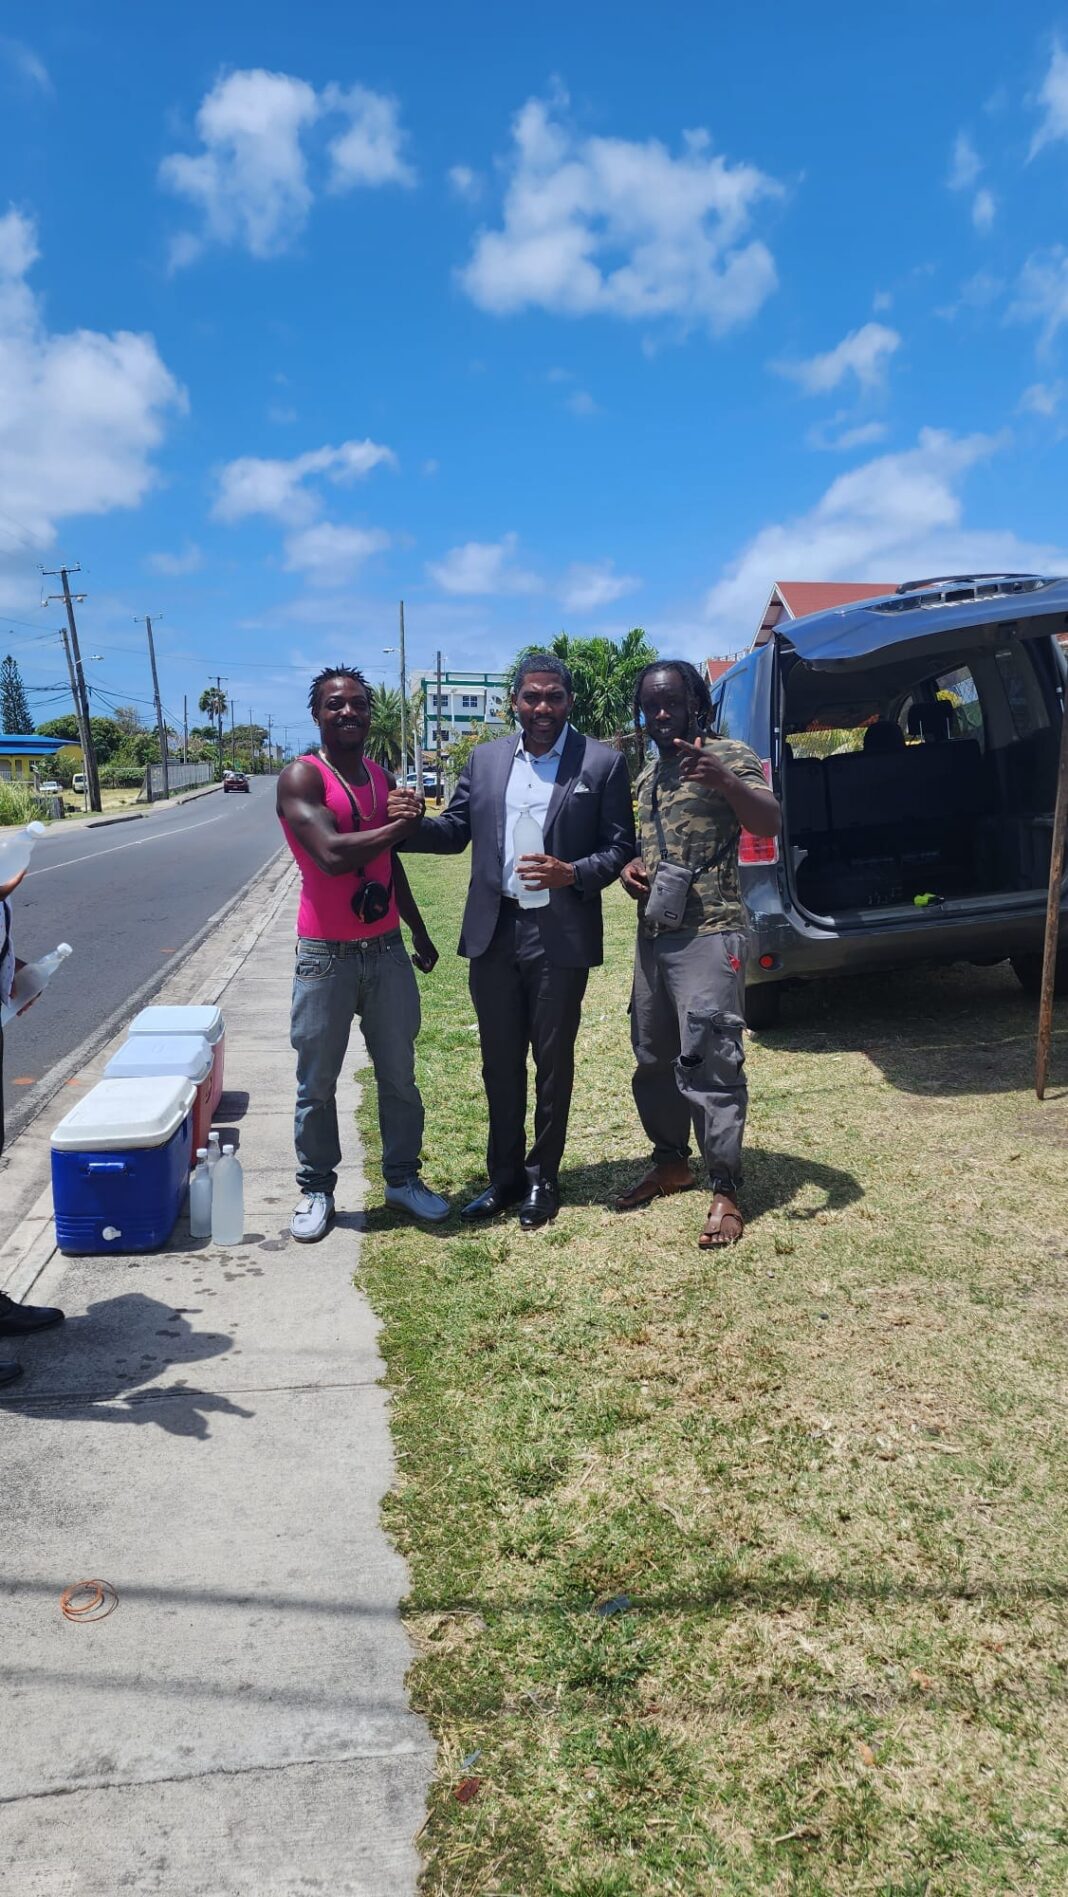 Terrance Drew, Prime Minister of St Kitts and Nevis, met with two young businessmen who have been managing and operating the Federation's refreshing drink of jelly water business. Yesterday, on March 23, 2023, he praised both children on his official social media account